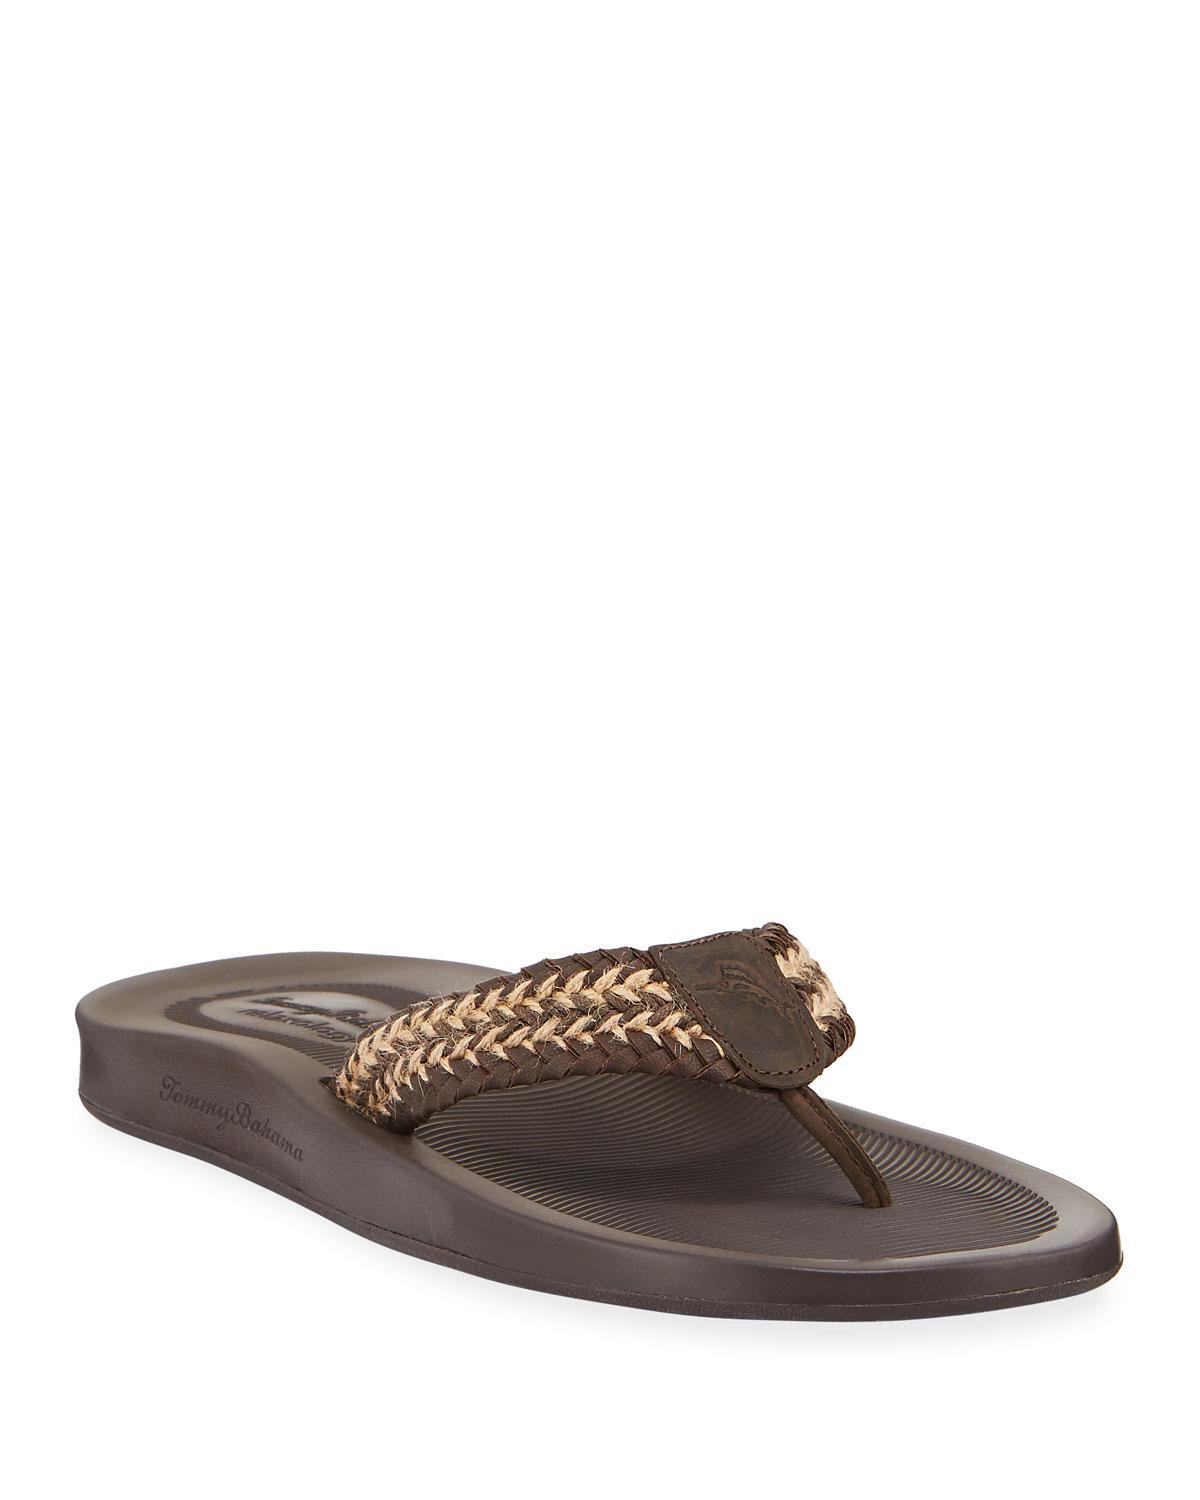 Lyst - Tommy Bahama Men's Elio Spring Leather Thong Sandals in Brown ...